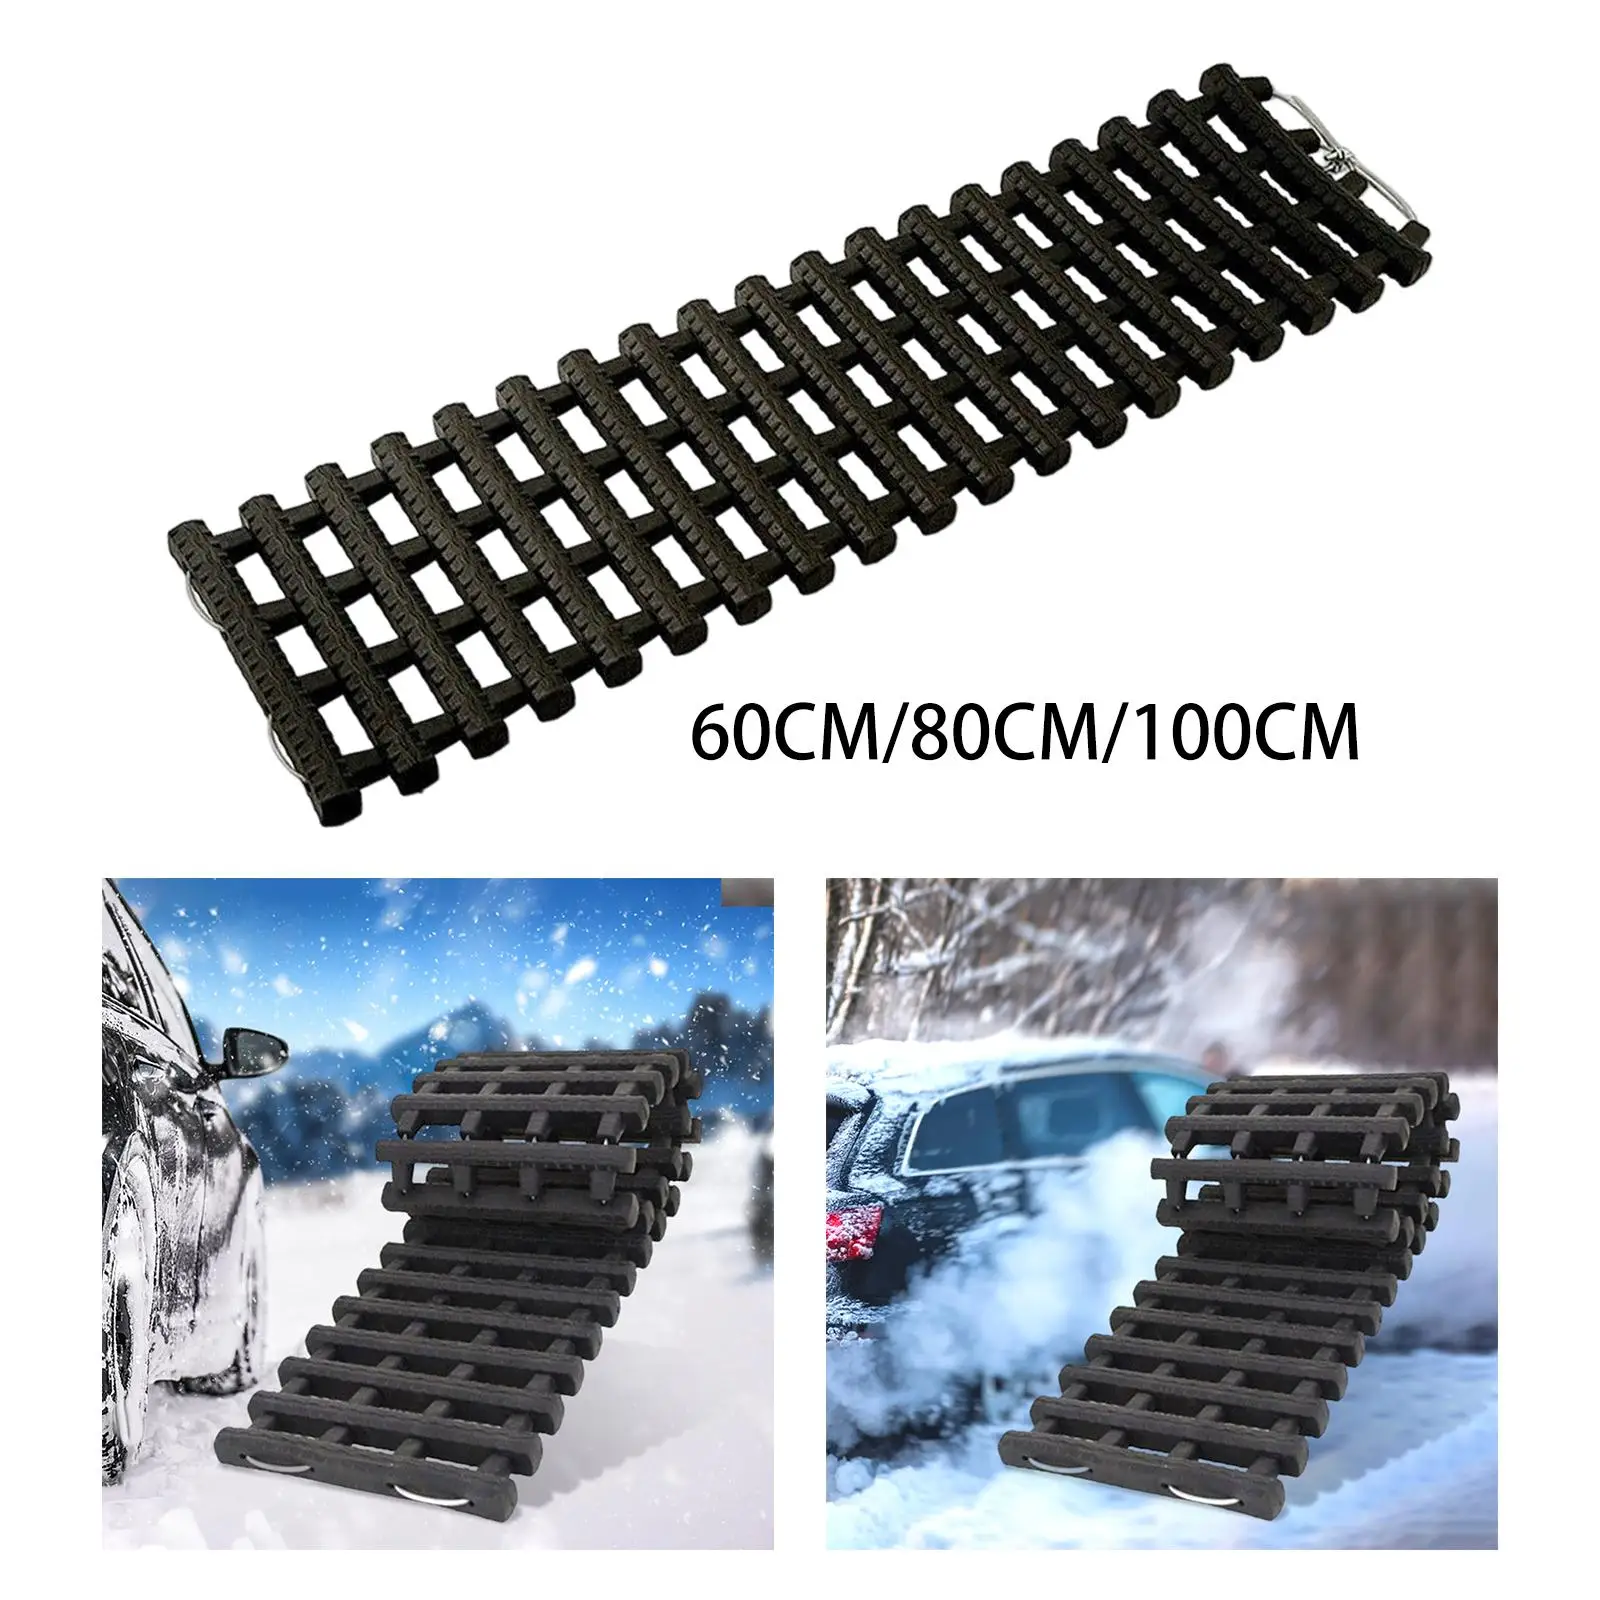 Auto Traction Mat Durable Multifunctional Escape Mat Universal for Ramp Sand